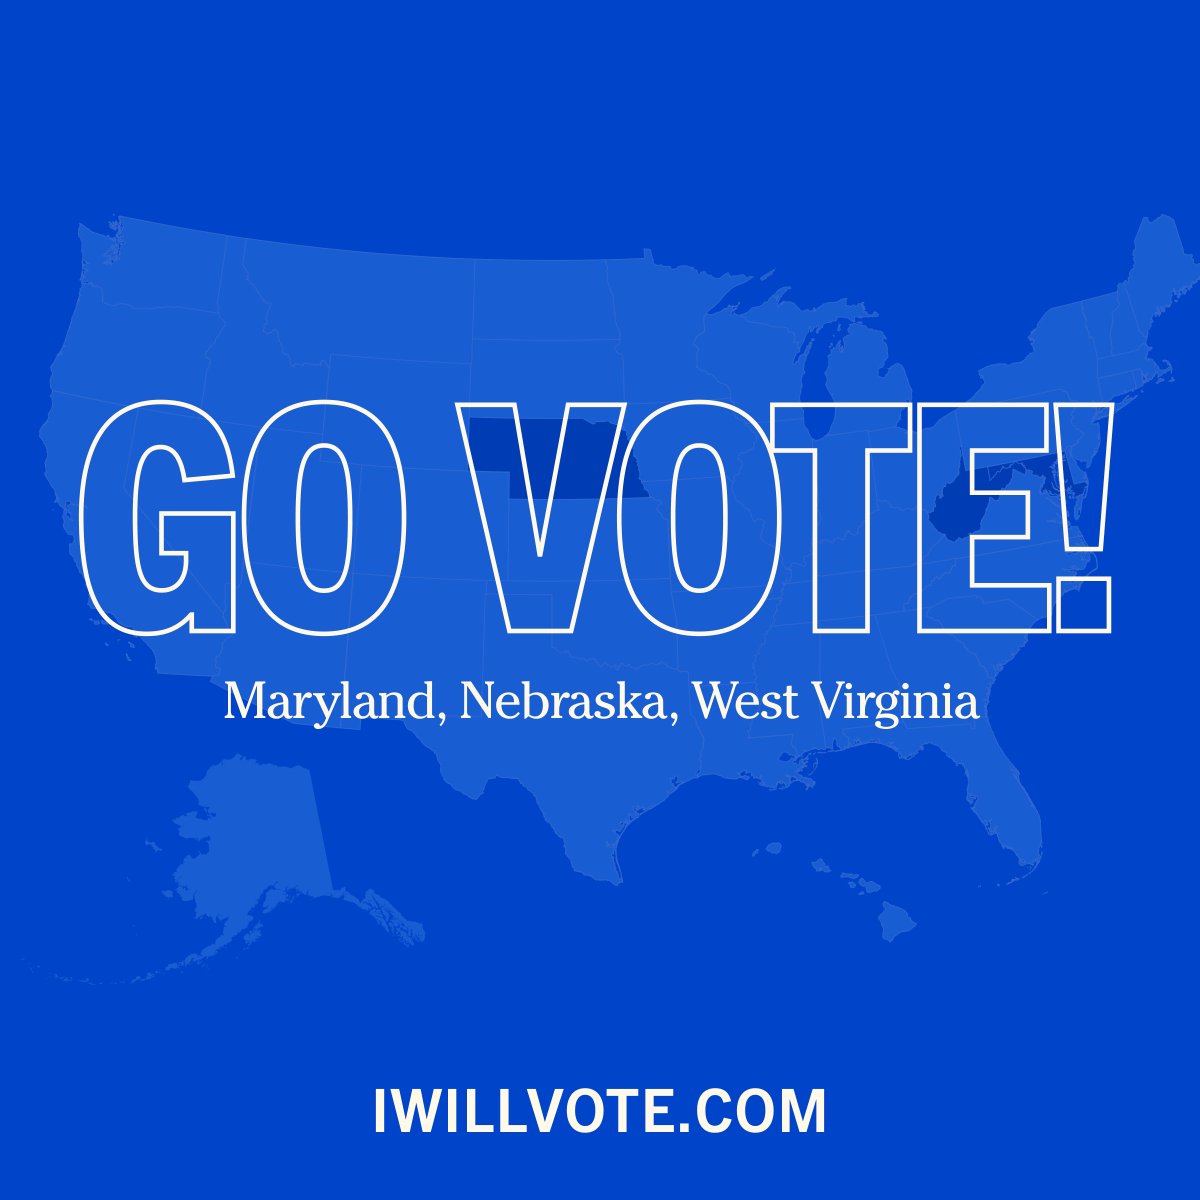 Maryland, Nebraska, and West Virginia, today is your presidential primary! Find your polling place at IWillVote.com.